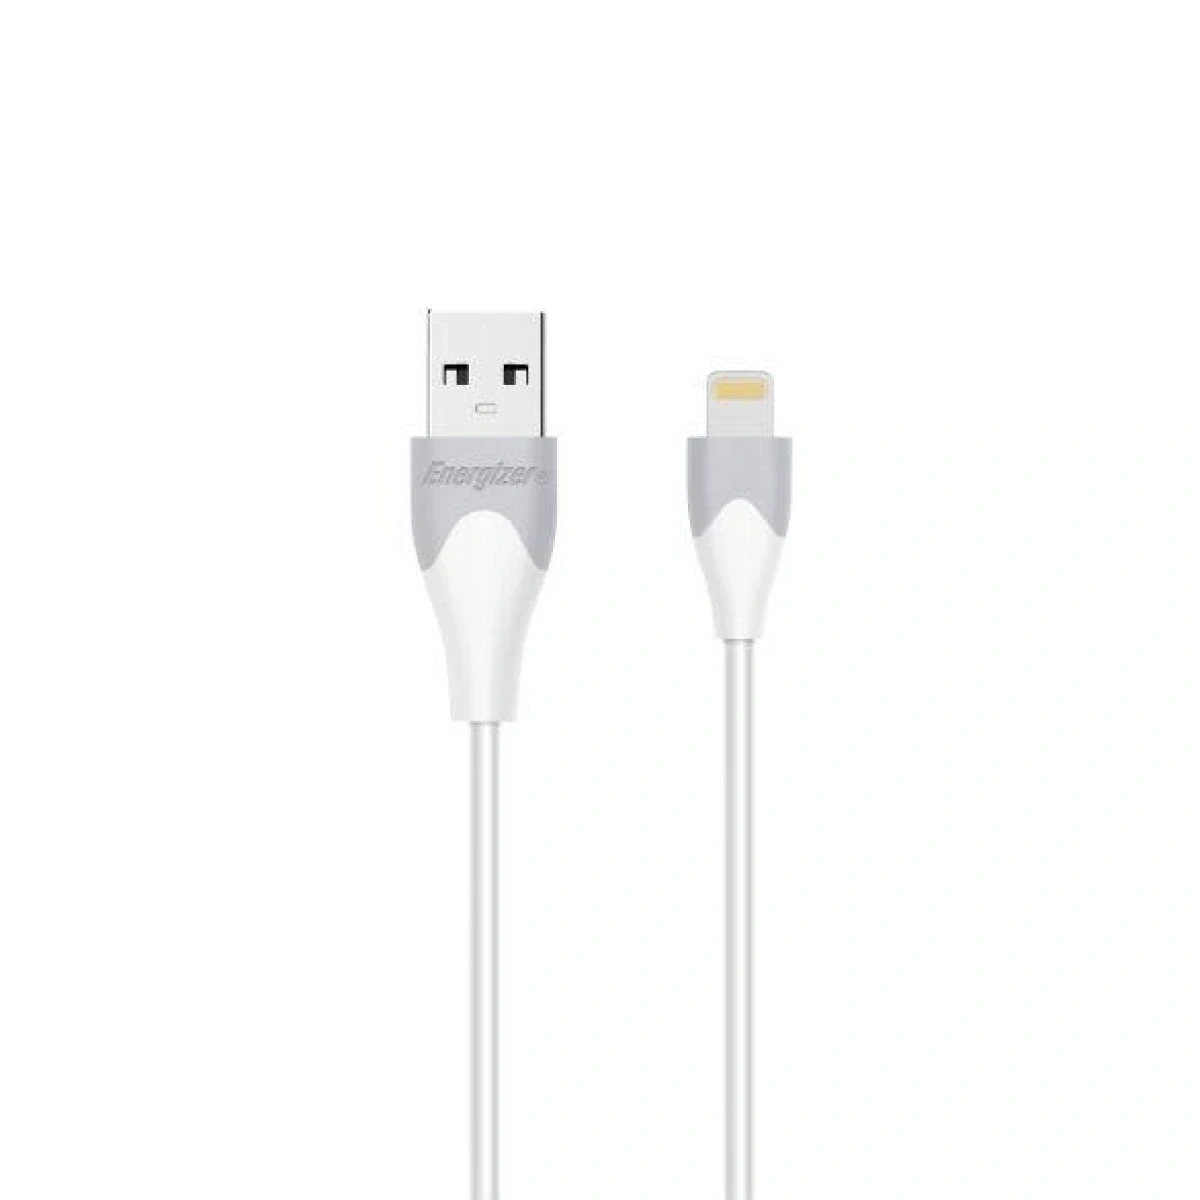 Energizer Classic CABLE LIGHTNING BiColor 1.2M White